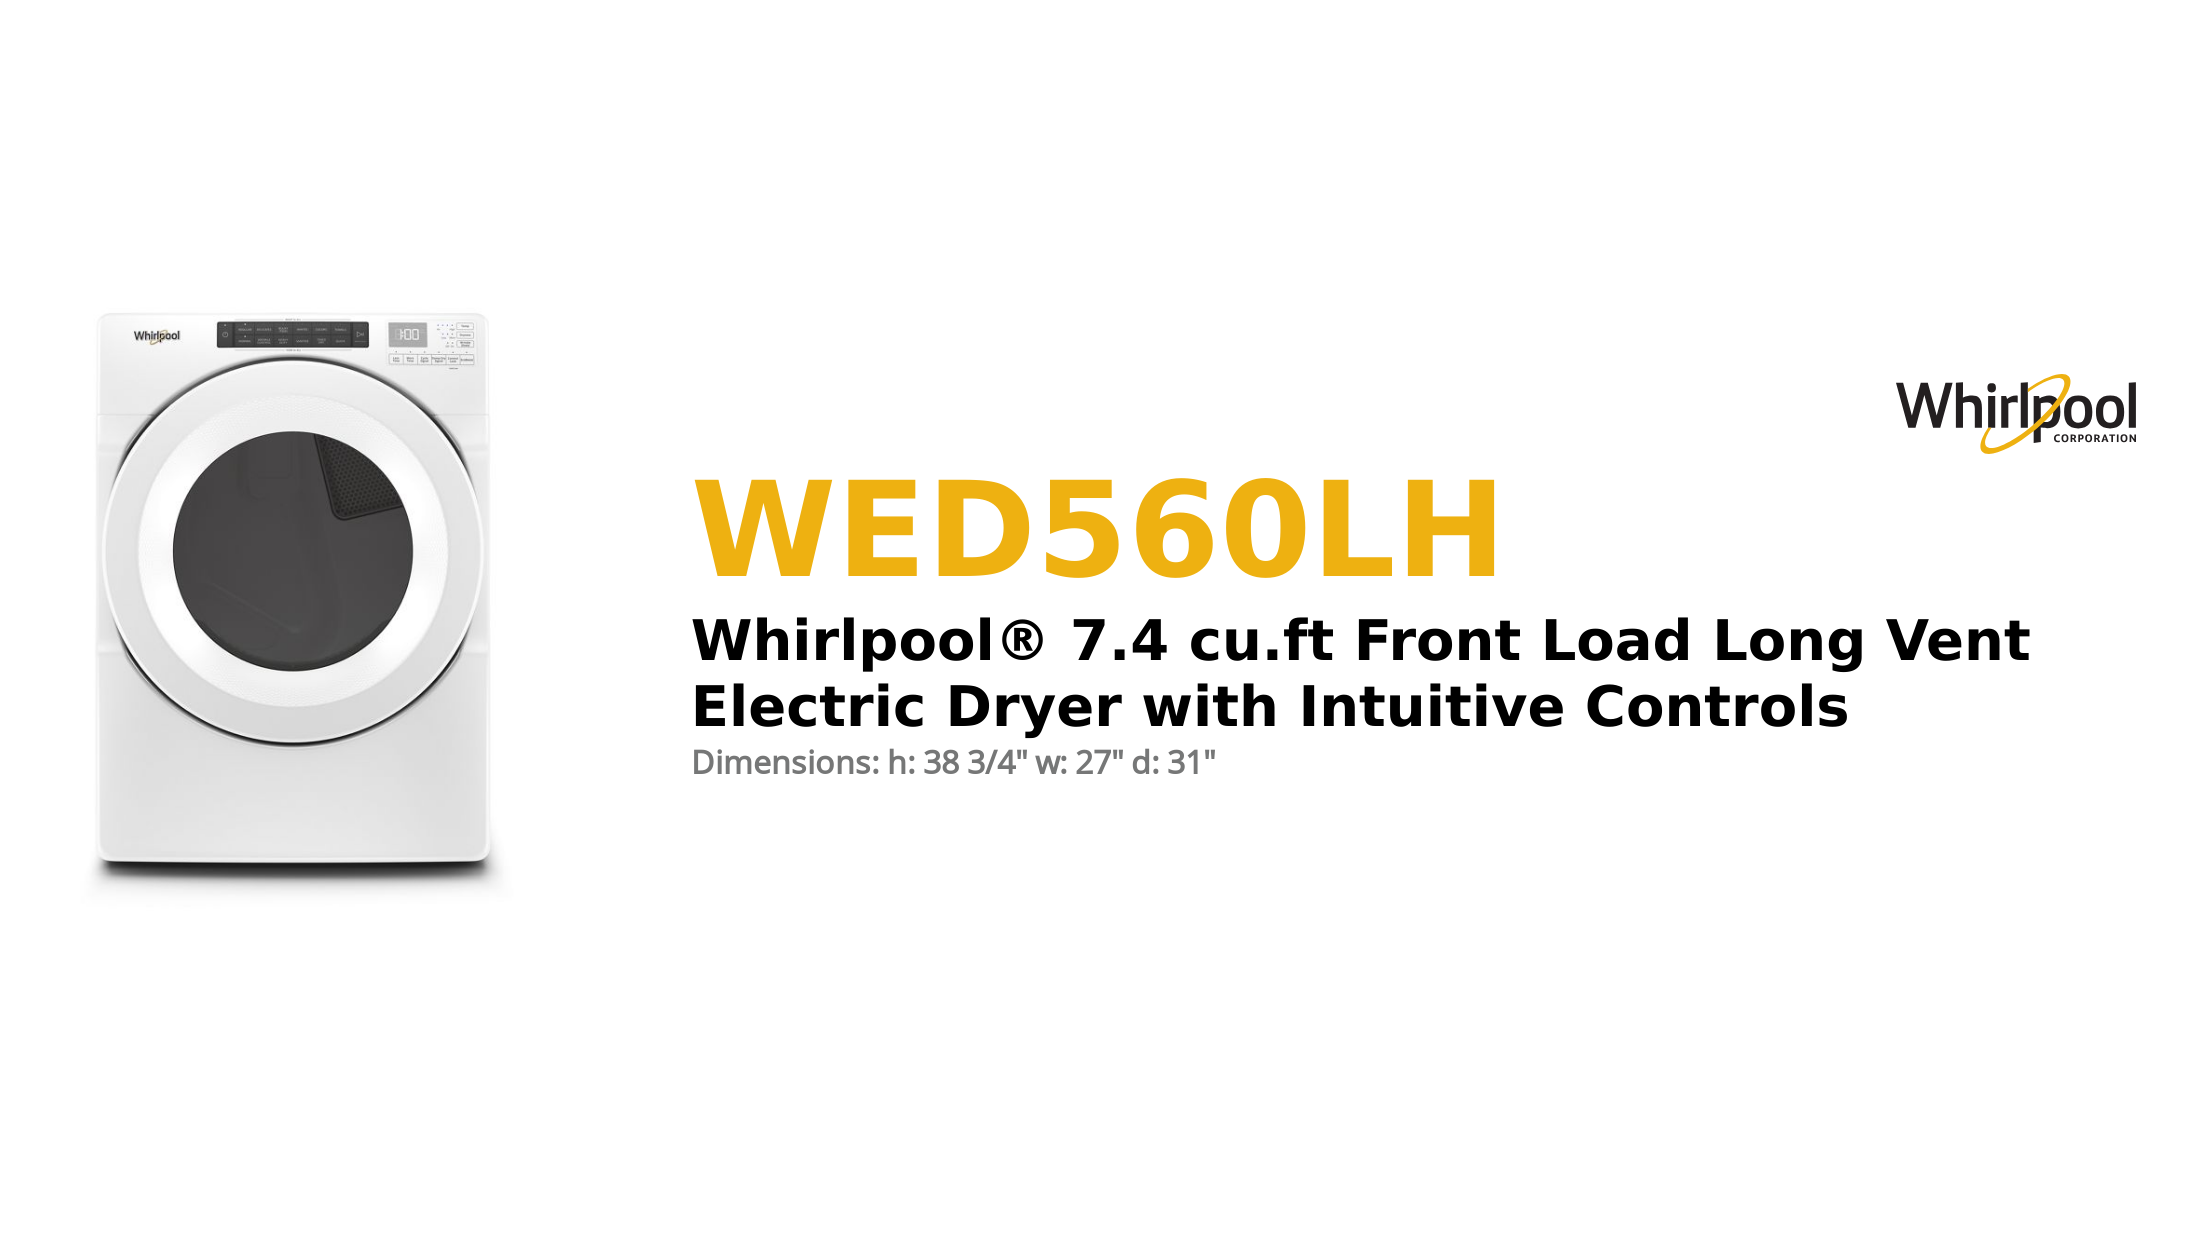 Whirlpool® 7.4 cu.ft Front Load Long Vent Electric Dryer with Intuitive Controls